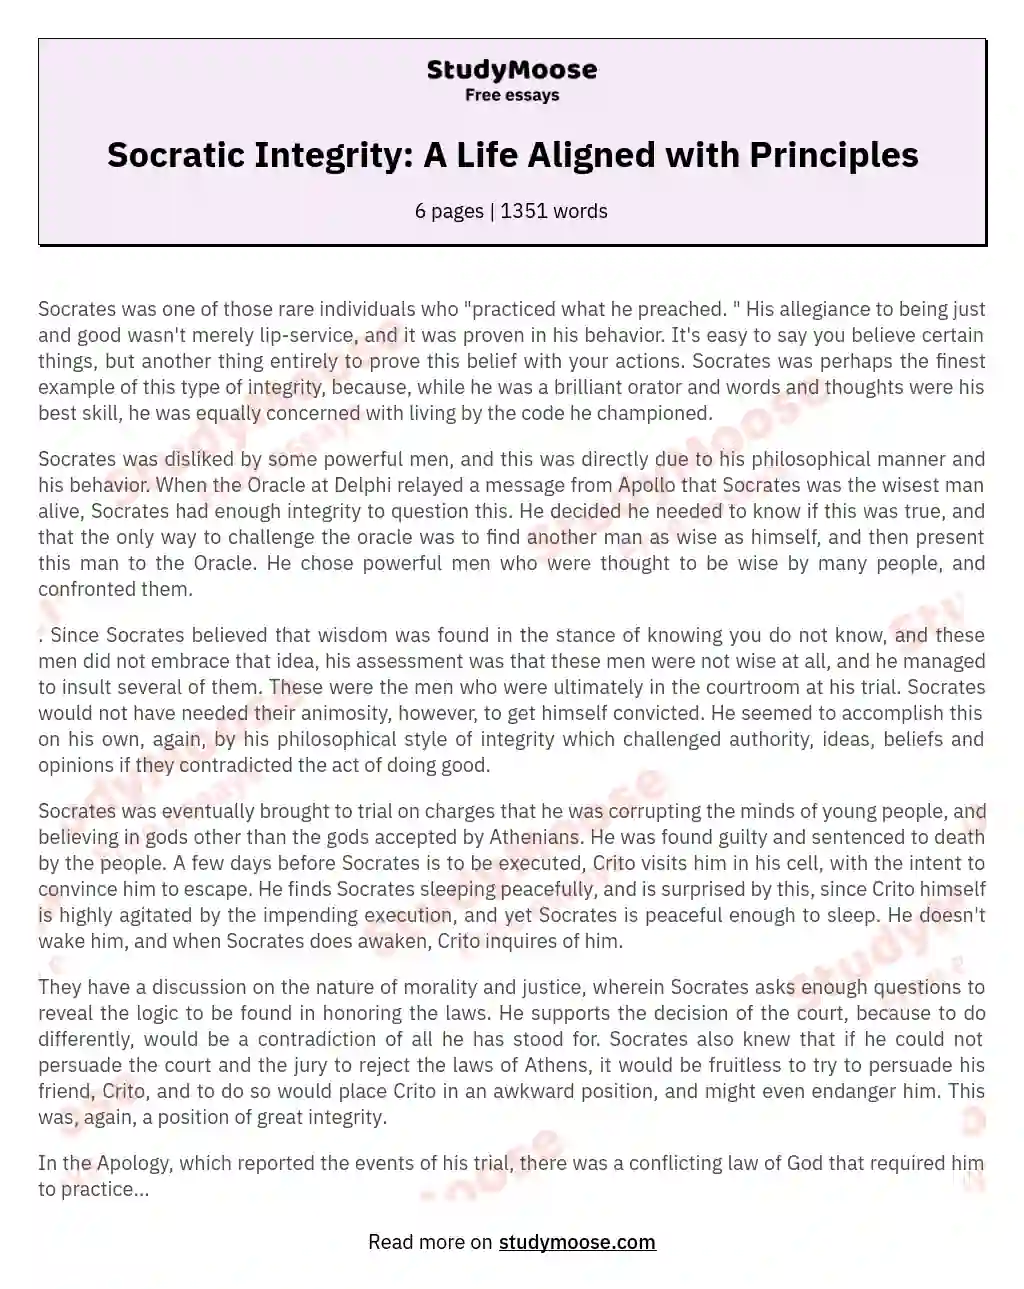 Socratic Integrity: A Life Aligned with Principles essay